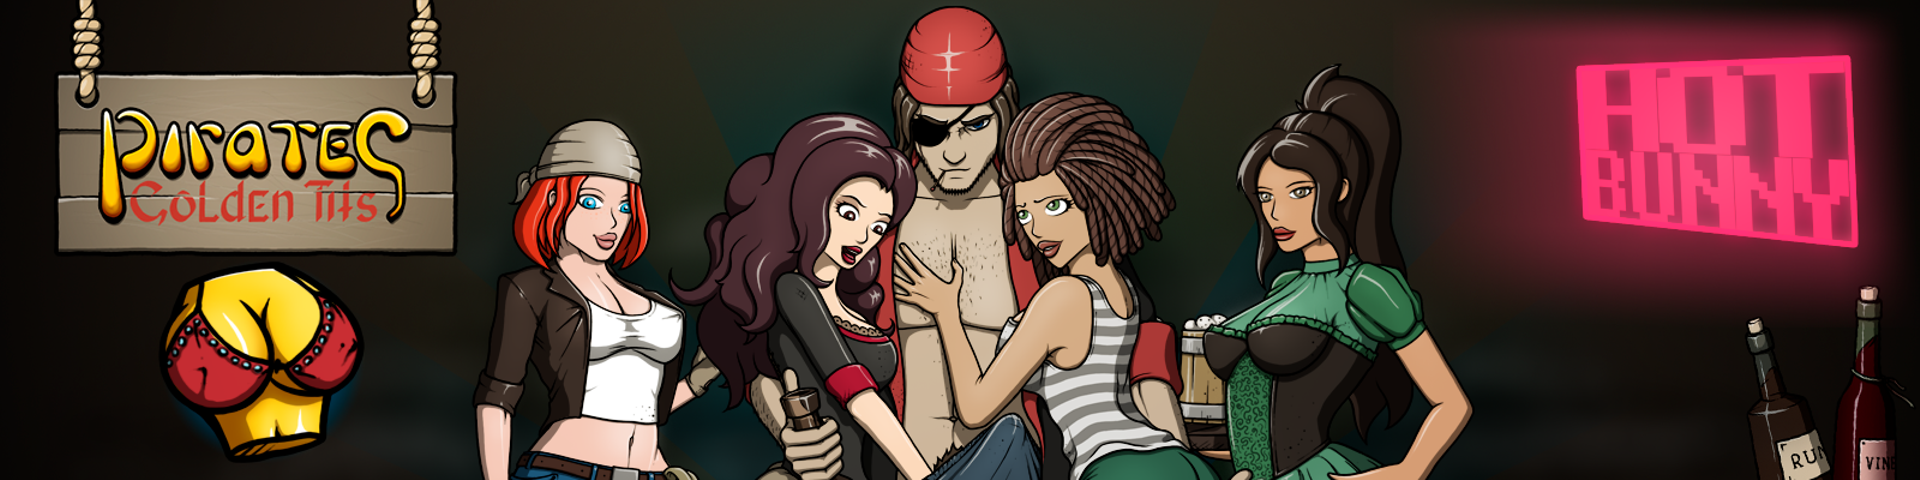 Pirates: Golden Tits - Version 0.10.0 by Hot Bunny Win/Mac/Android